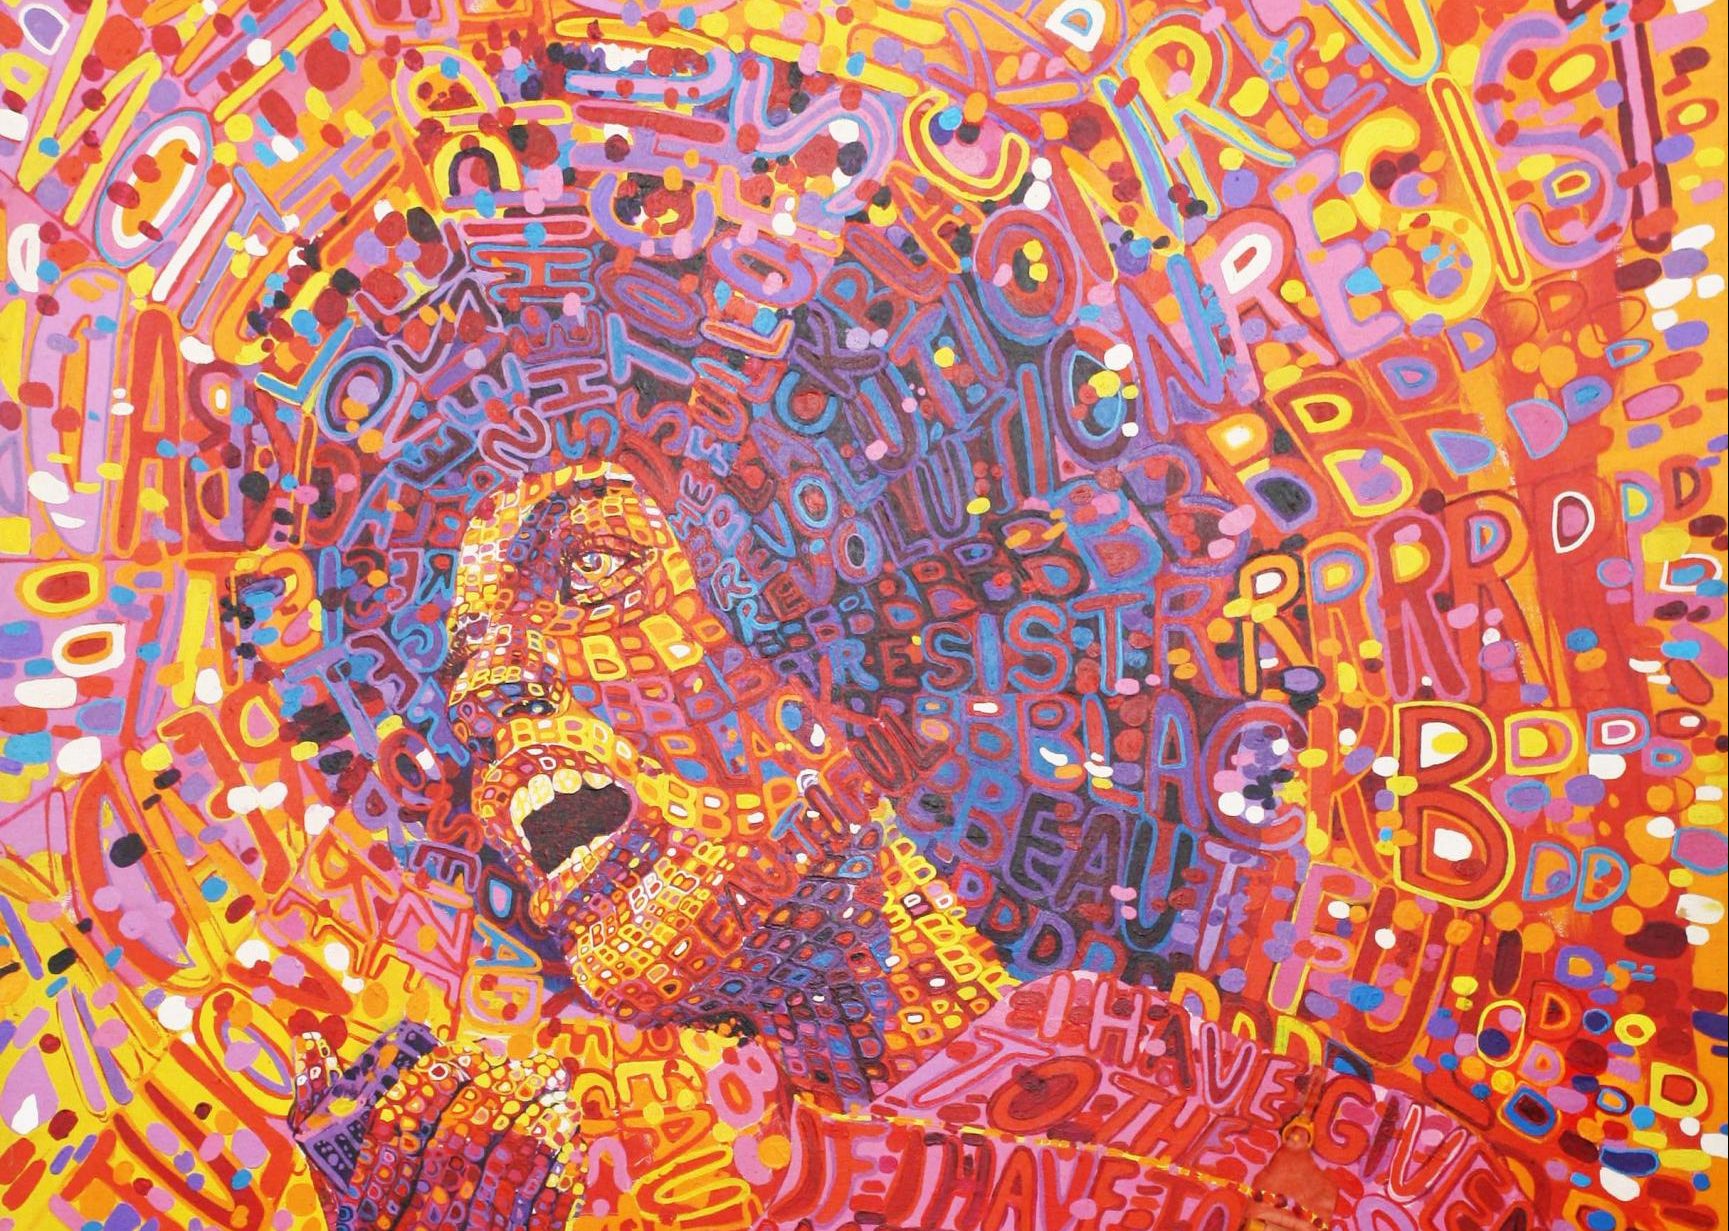 Red, yellow, blue abstract image of Angela Davis.